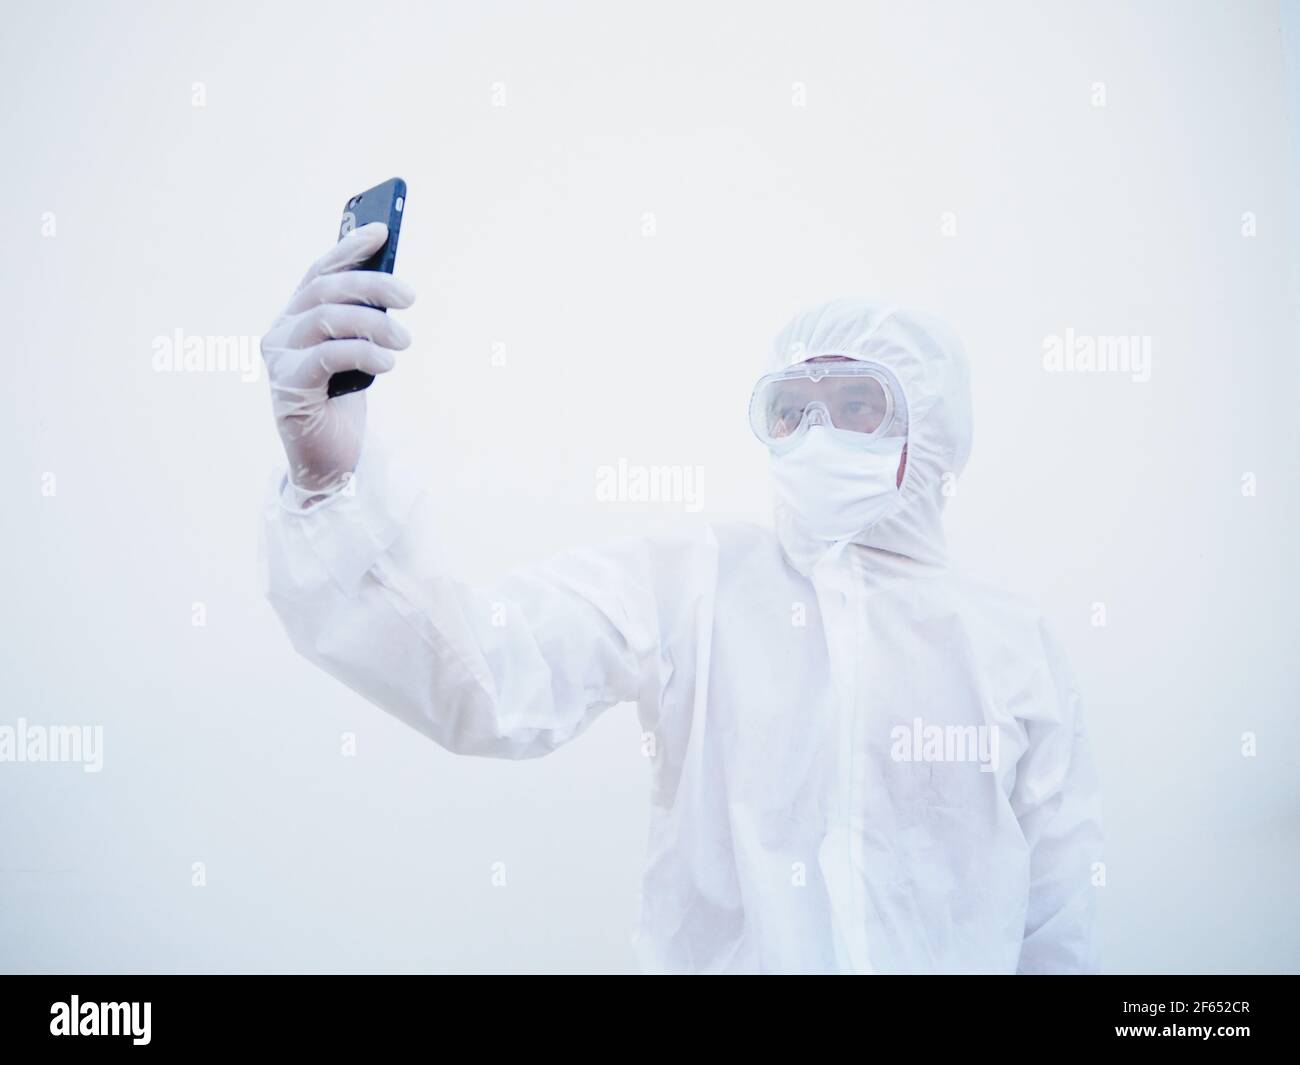 Young doctor or scientist in PPE suite uniform while using his phone for selfie and video chats with family or freind. coronavirus or COVID-19 concept Stock Photo